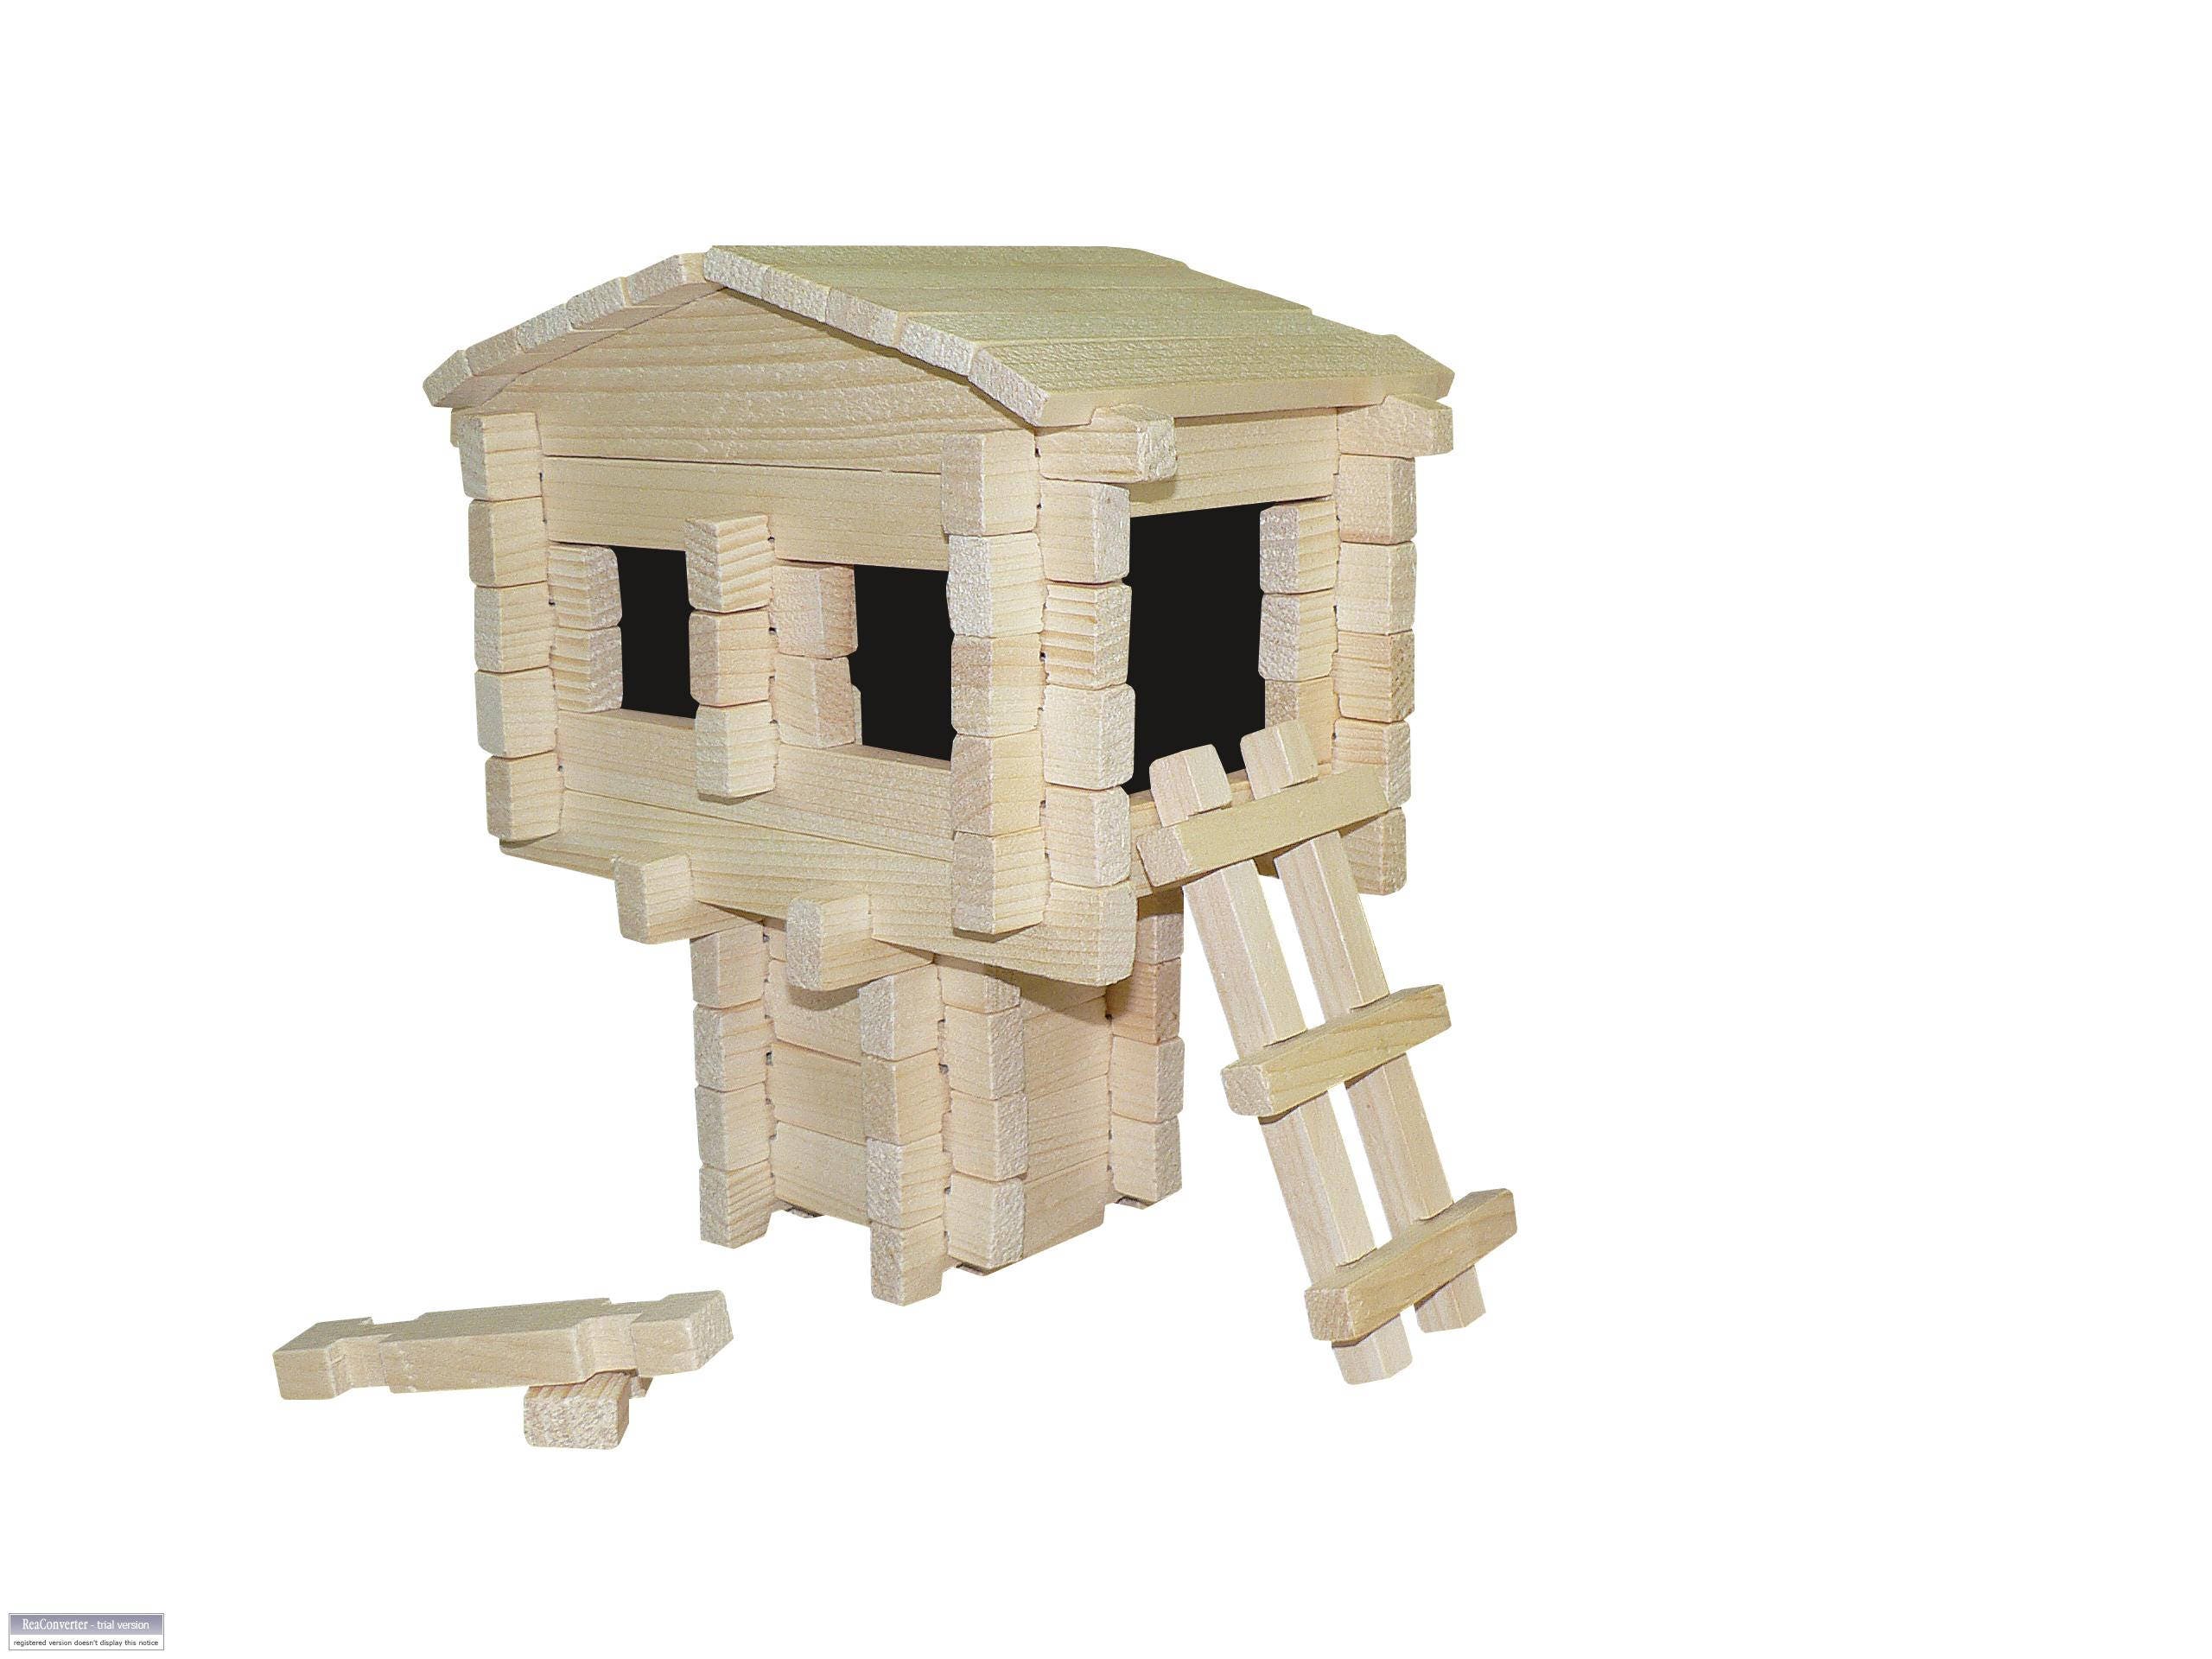 Roy Toy Build and Paint Fort Play Set